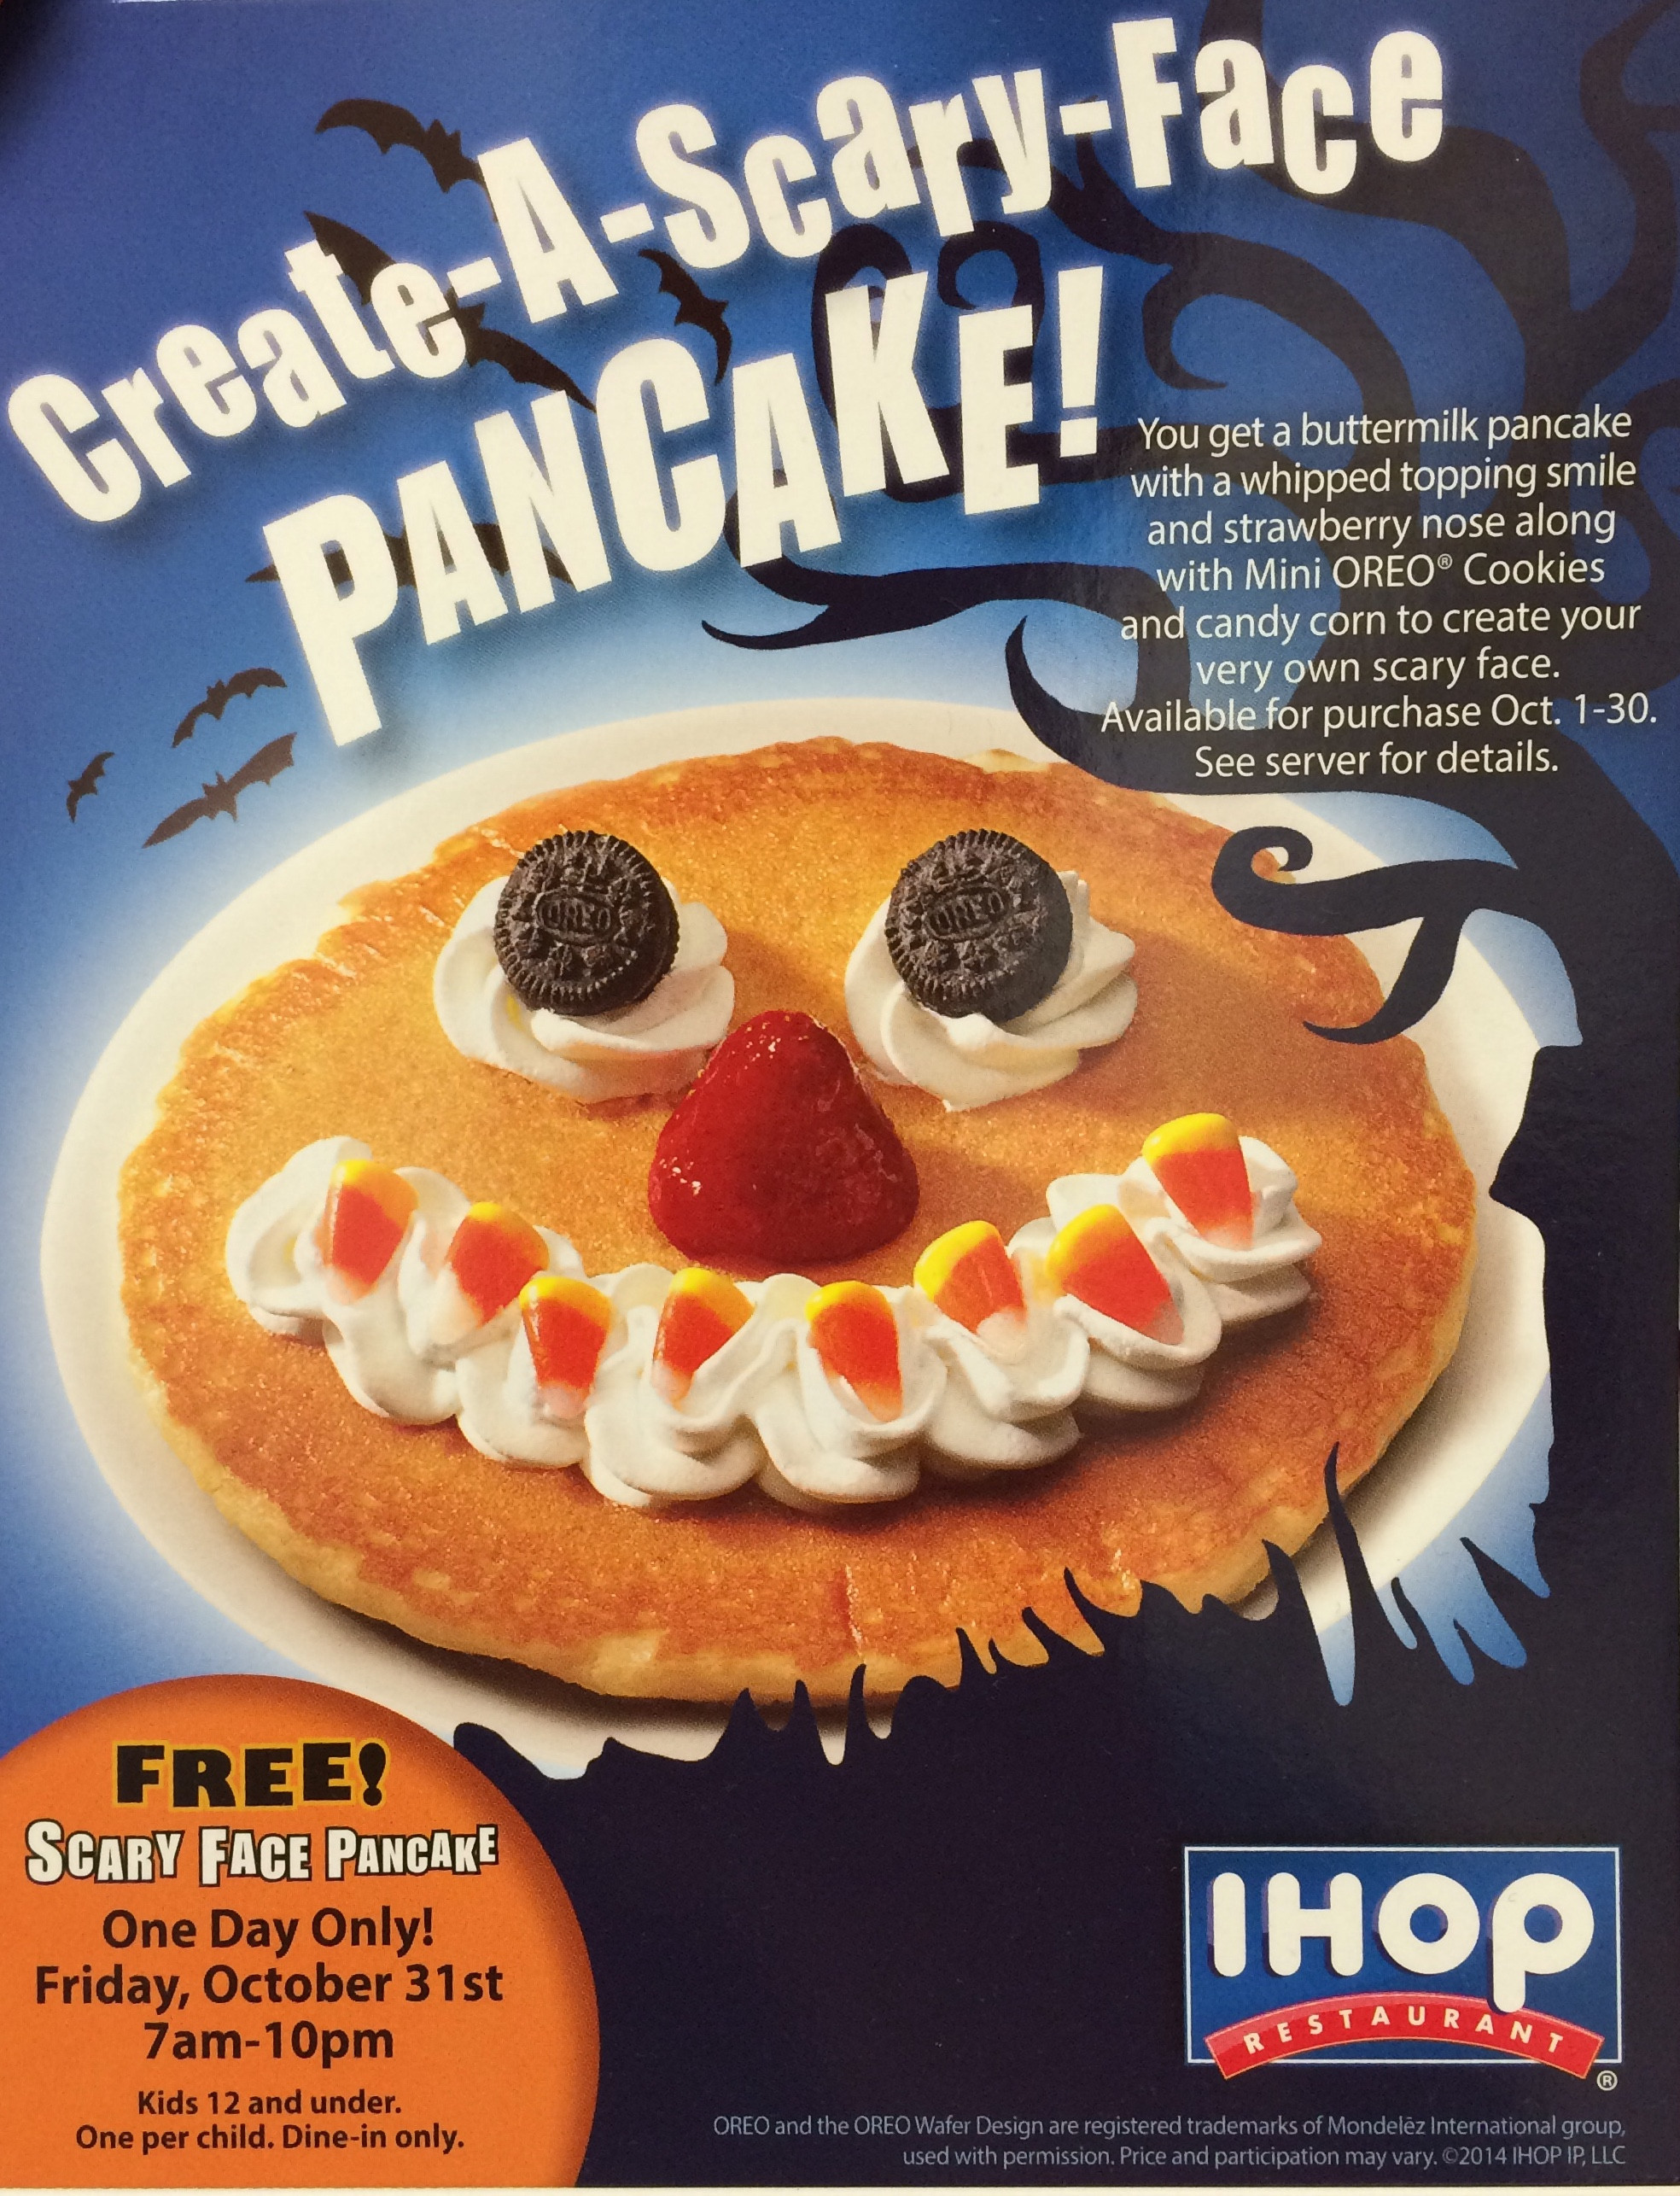 Ihop Free Pancakes Halloween
 Halloween Restaurant Deals Check out these Free & Cheap